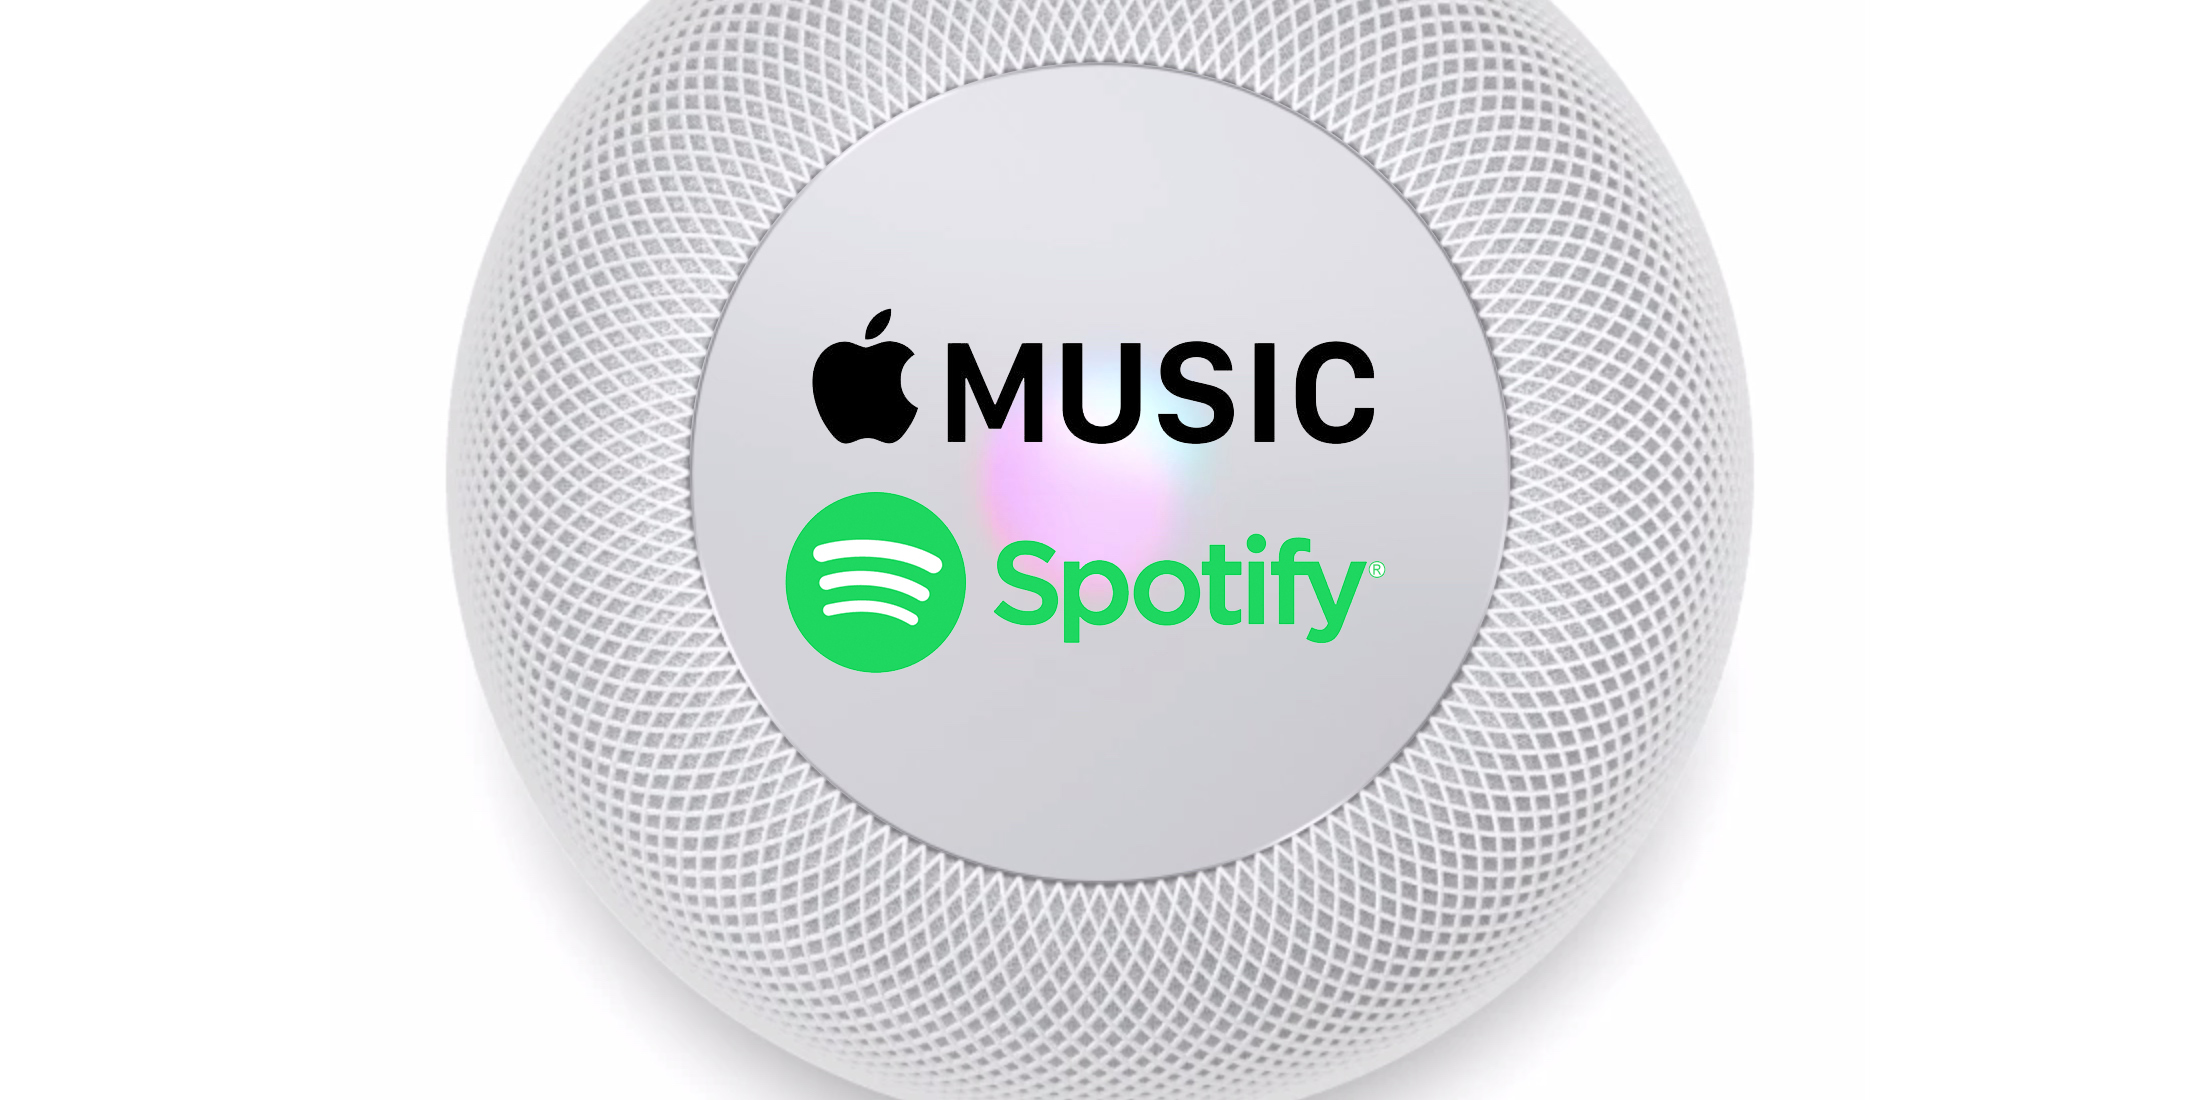 is spotify better than apple music